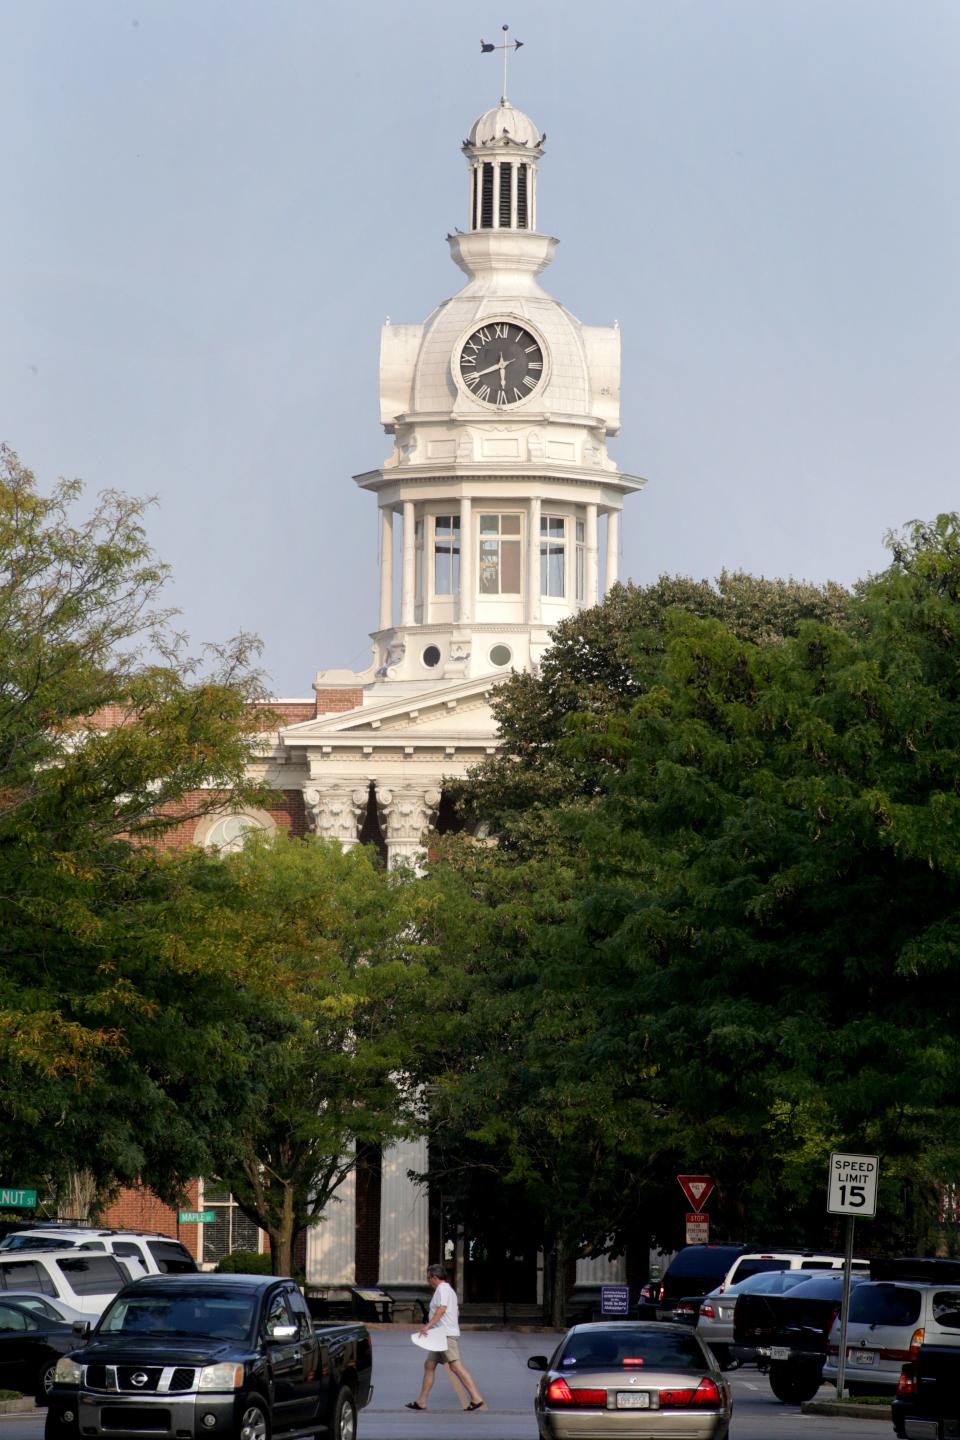 The Rutherford County Commission meets at the historic Rutherford County Courthouse in the center of Murfreesboro's downtown Square.